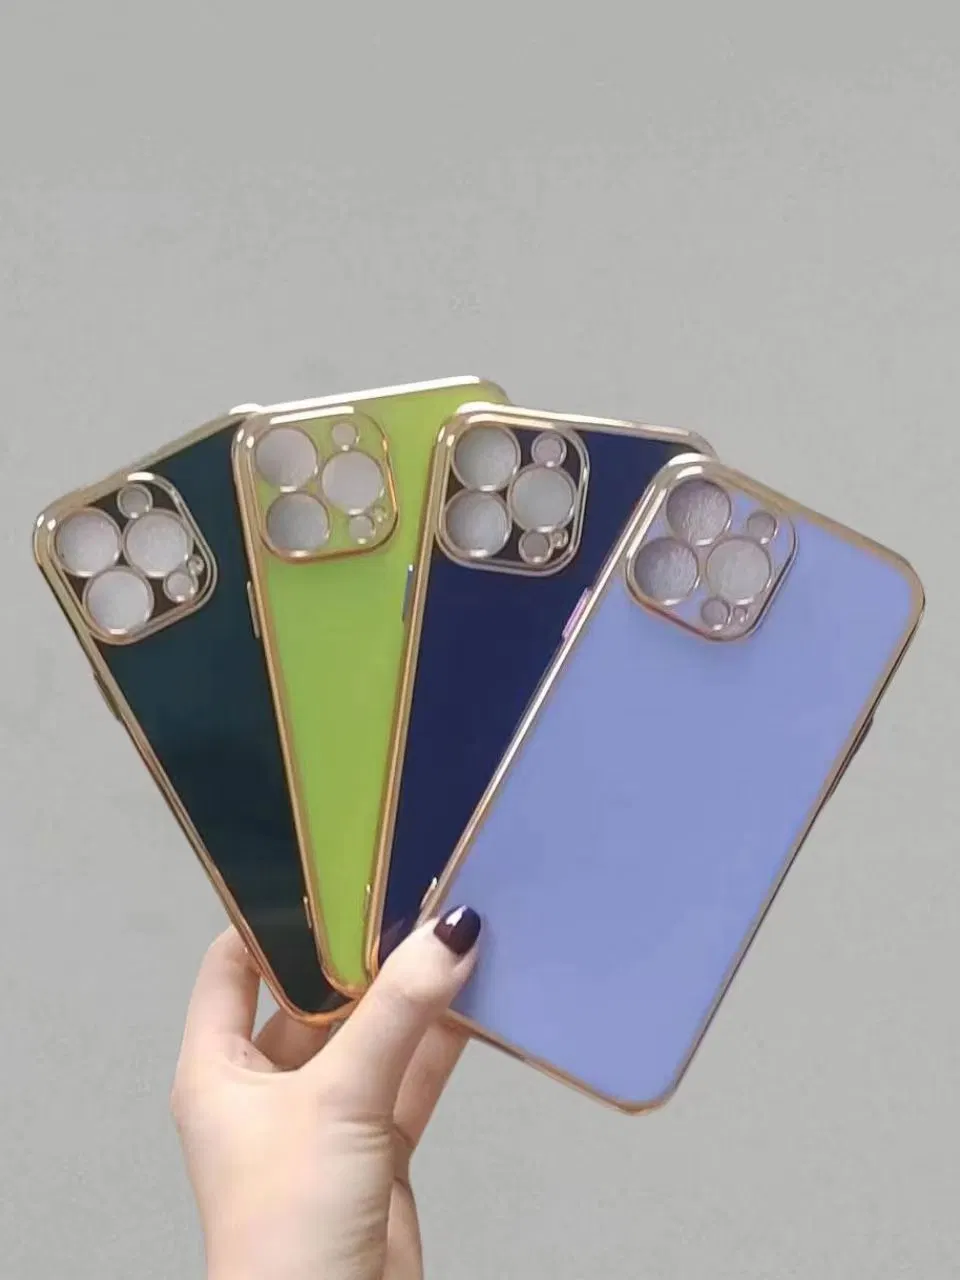 Luxury Ladies Border Electroplating Colorful TPU Soft Phone Case Back Cover for iPhone 11/12/13/14 PRO Max Phone Case